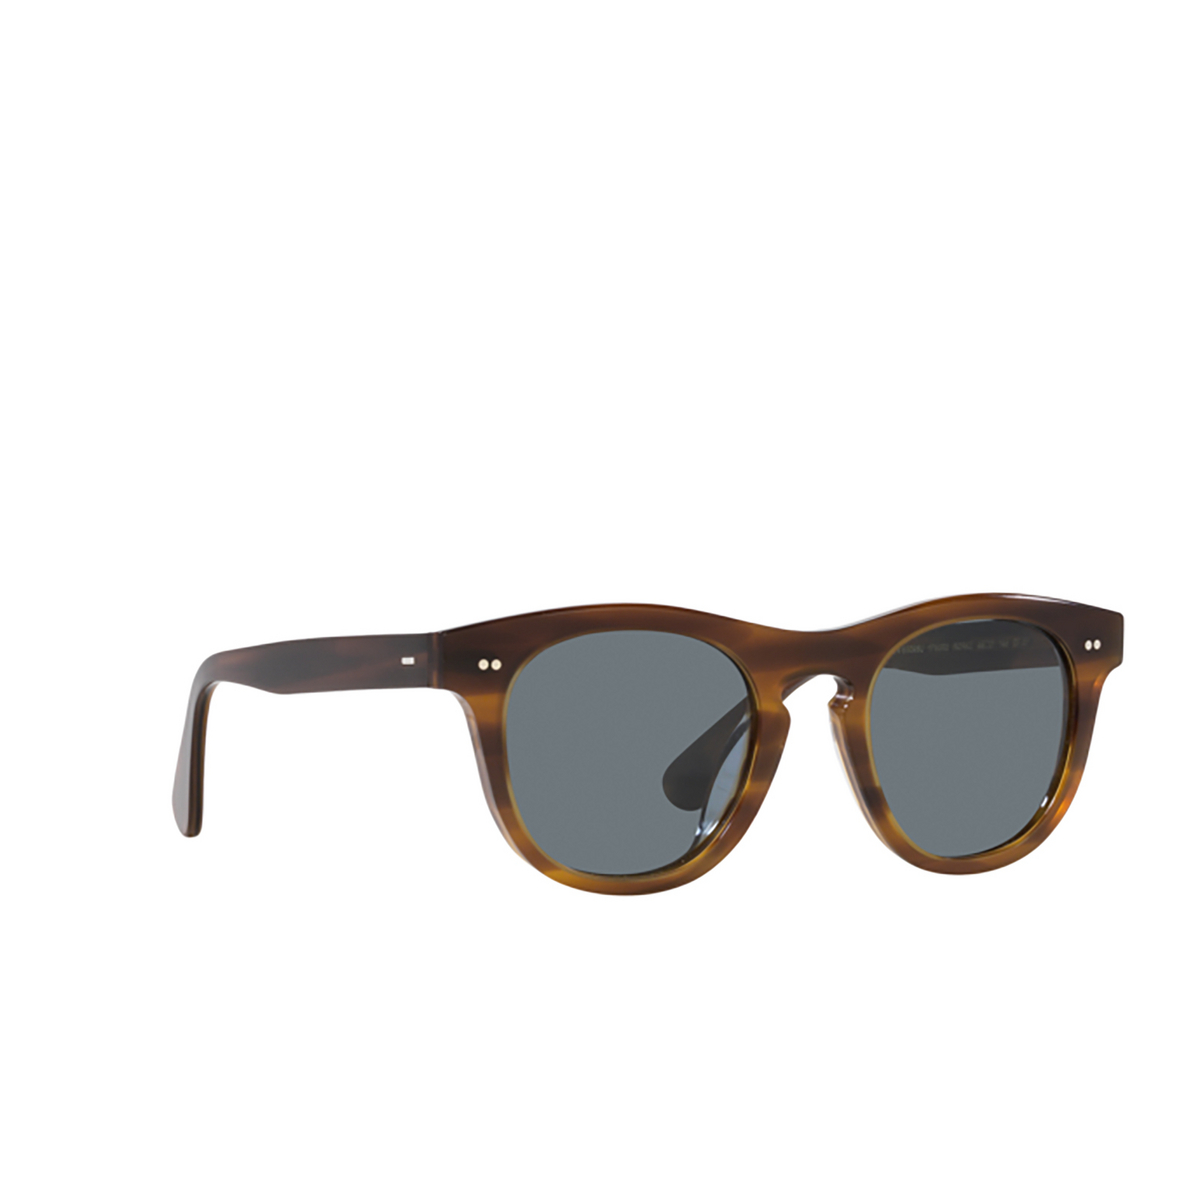 Oliver Peoples RORKE Sunglasses 1753R8 Sycamore - three-quarters view